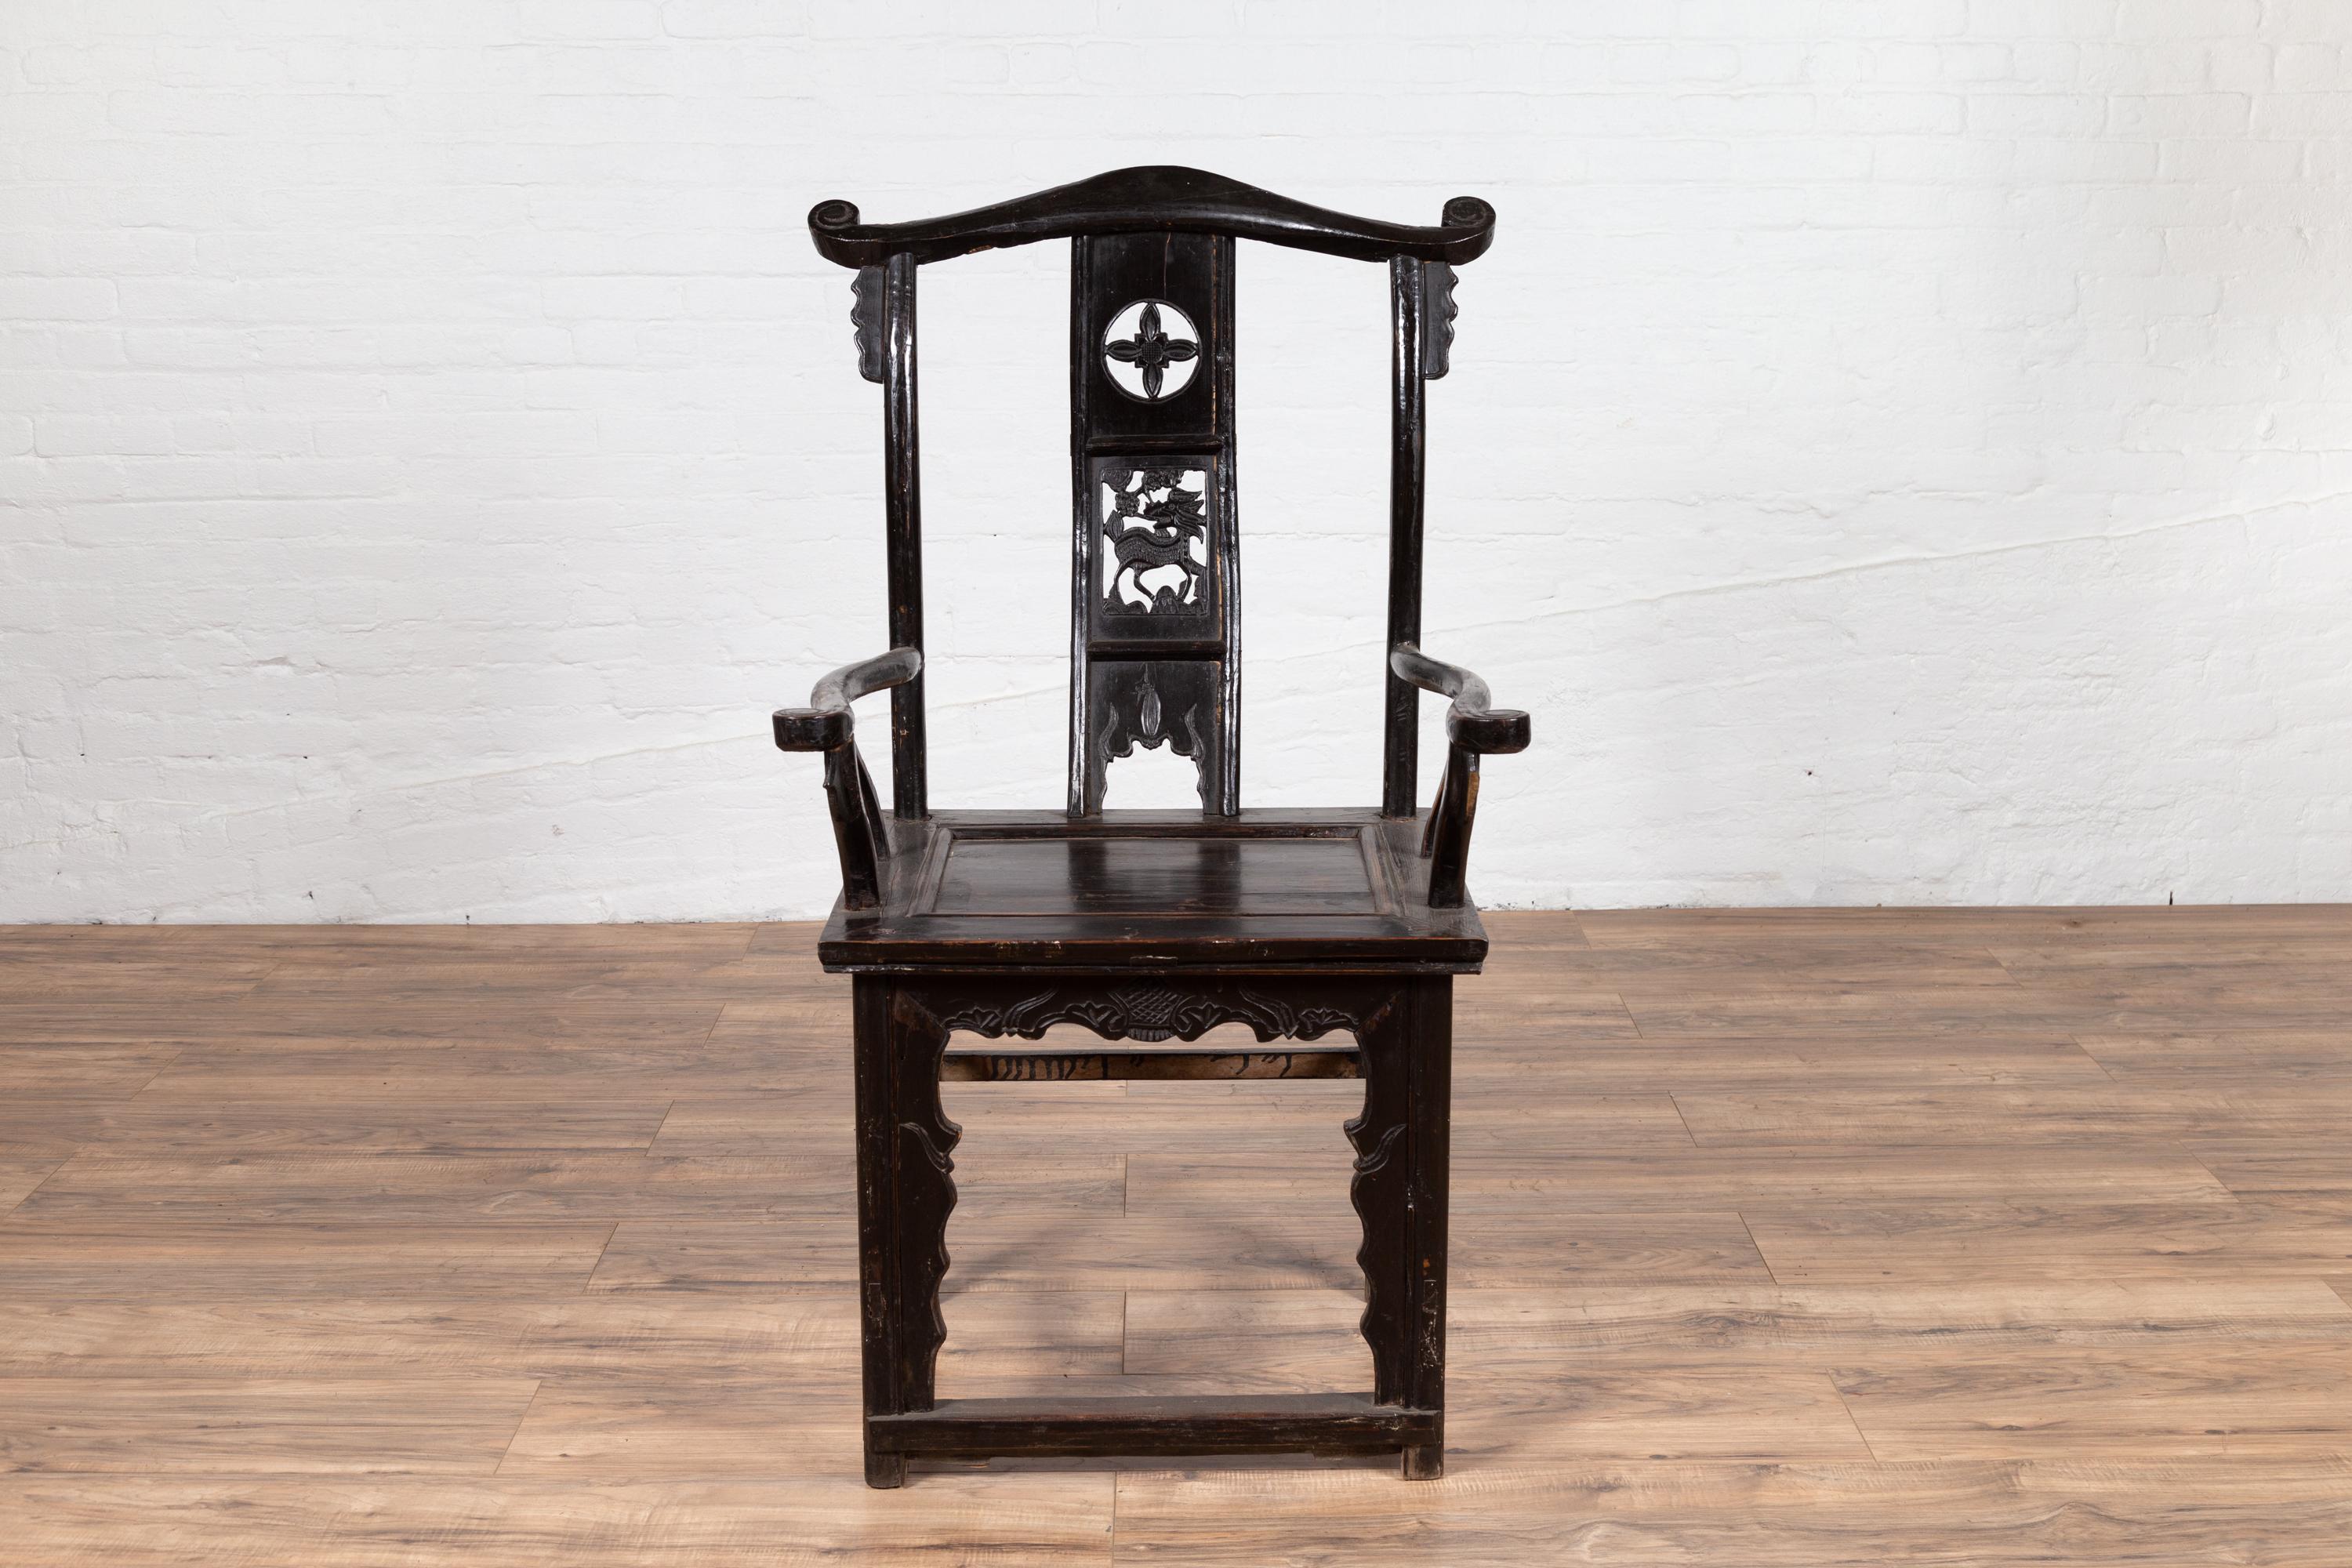 A Chinese Ming Dynasty style elmwood scholar's lamp-hanger armchair from the late 19th century, with carved splat, dark patina, curving arms and side stretchers. Born in China in the later years of the 19th century, this scholar's lamp-hanger chair